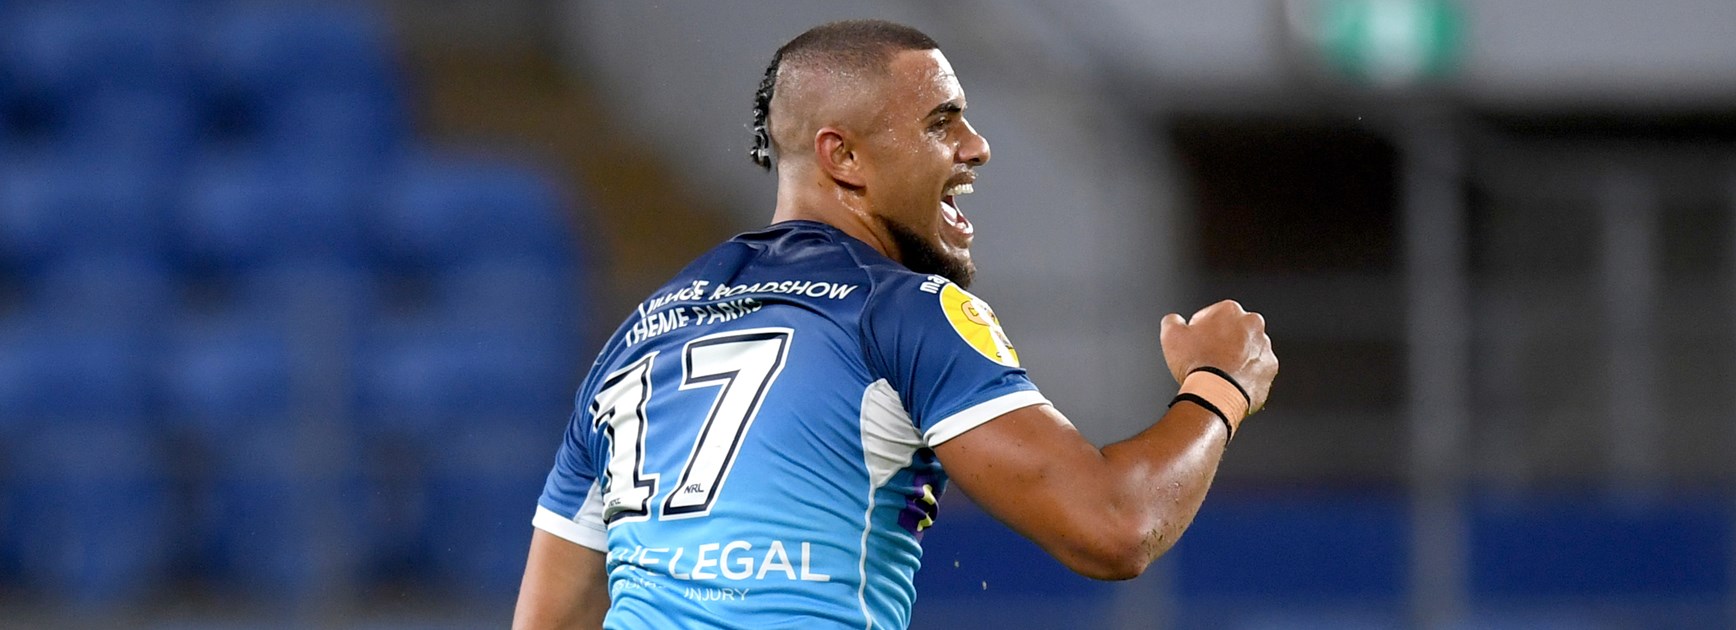 Thriller on the Gold Coast as Titans-Broncos derby ends in draw